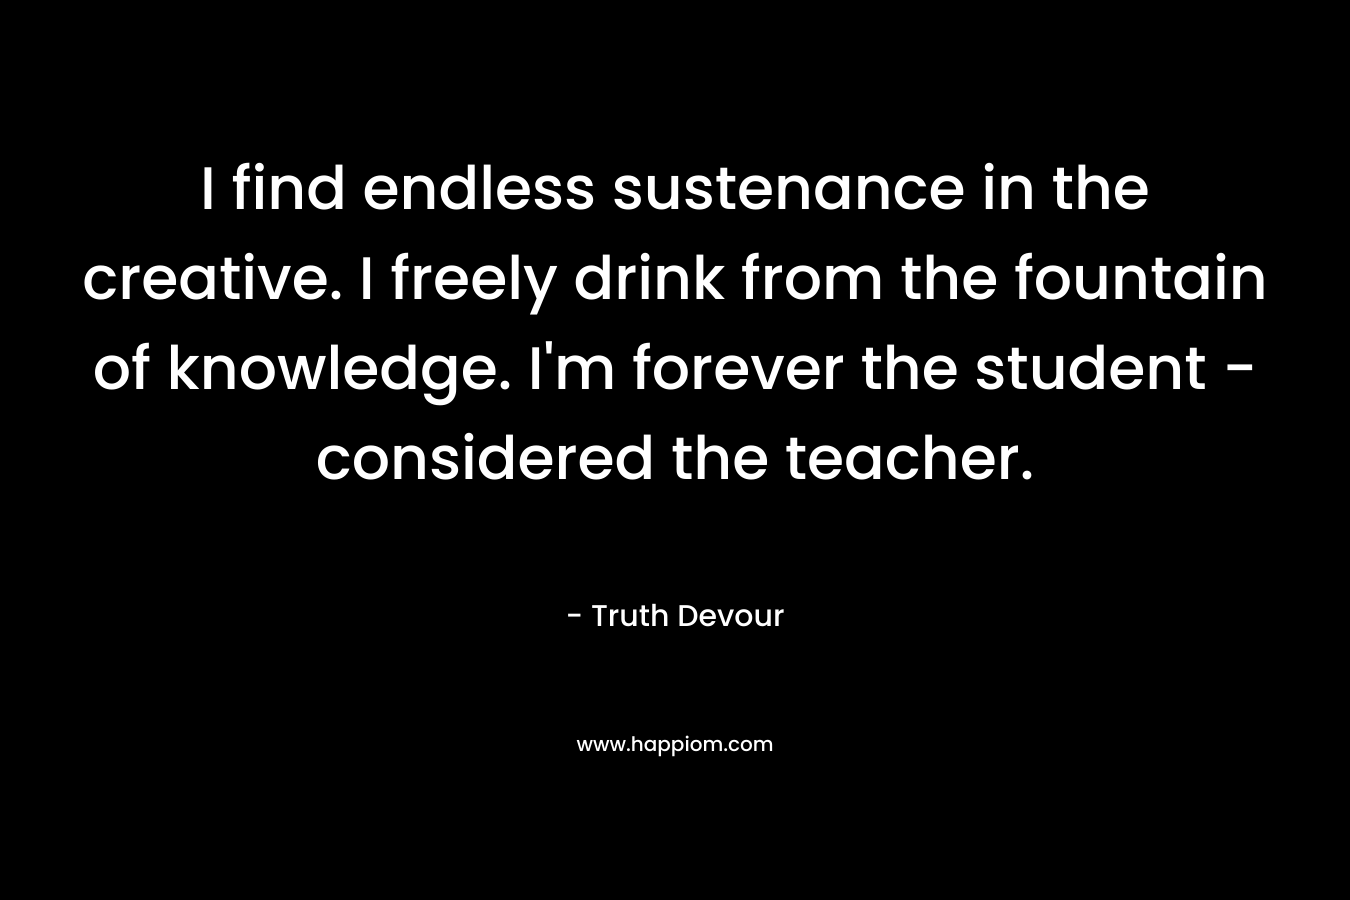 I find endless sustenance in the creative. I freely drink from the fountain of knowledge. I'm forever the student - considered the teacher.